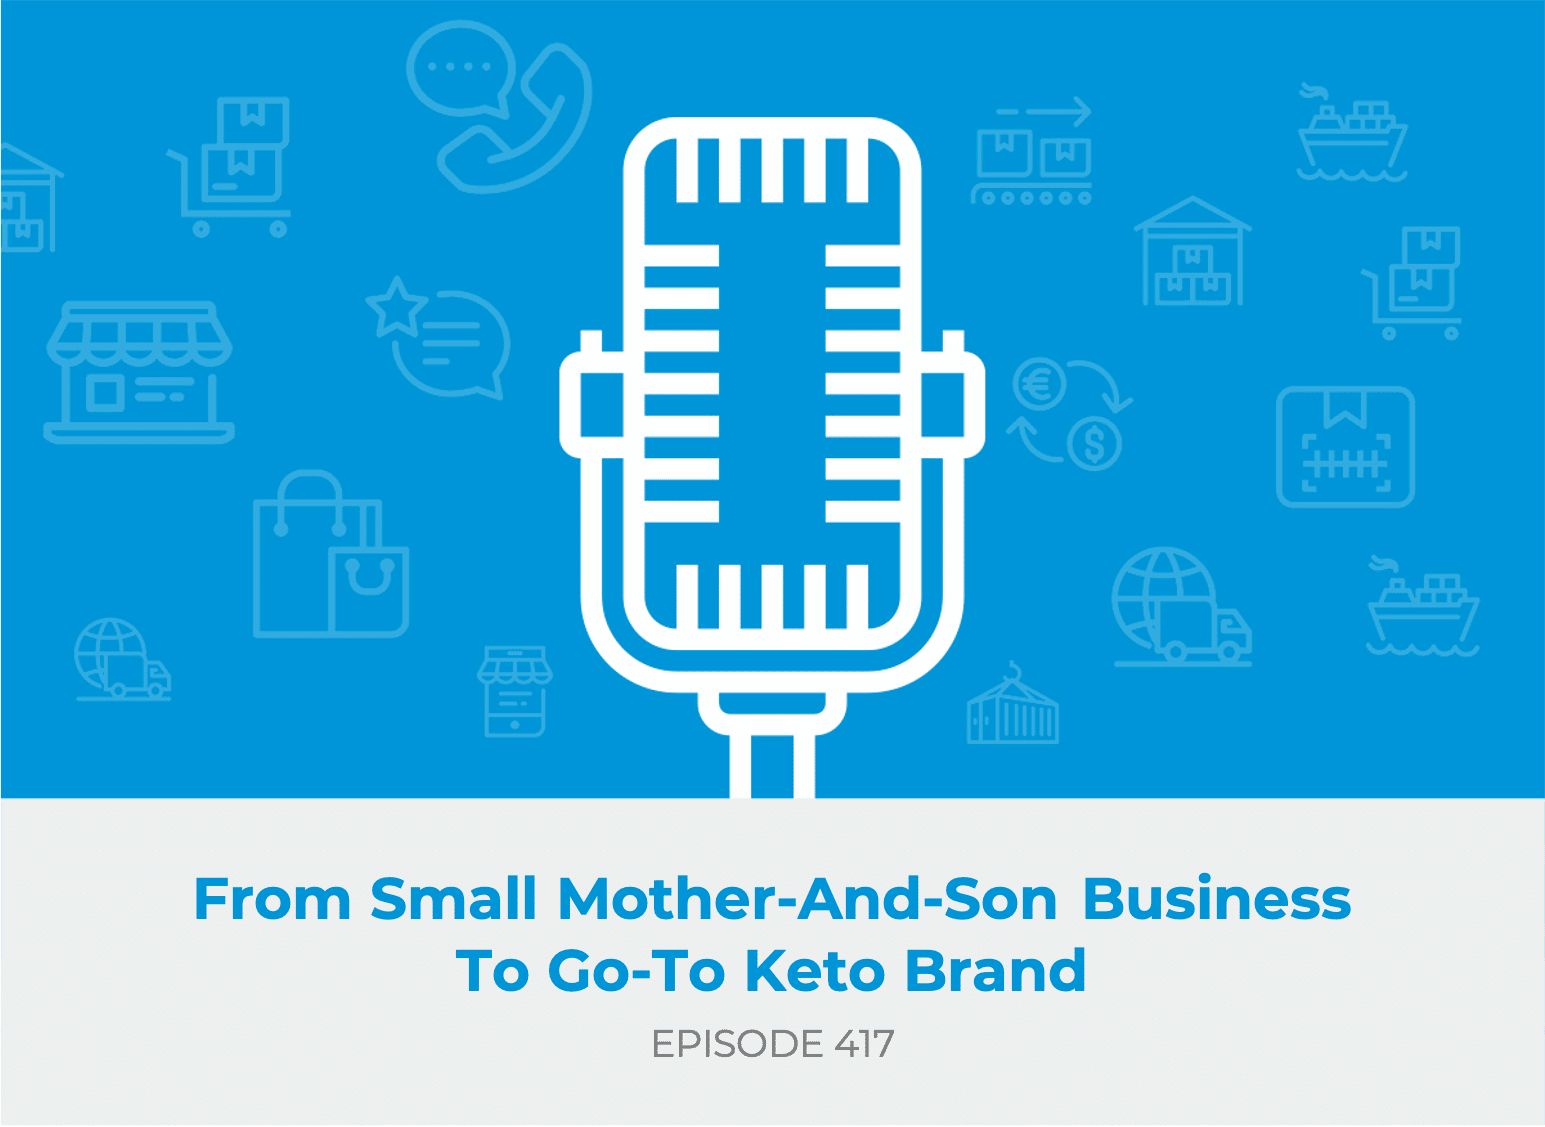 E417: From Small Mother-And-Son Business To Go-To Keto Brand